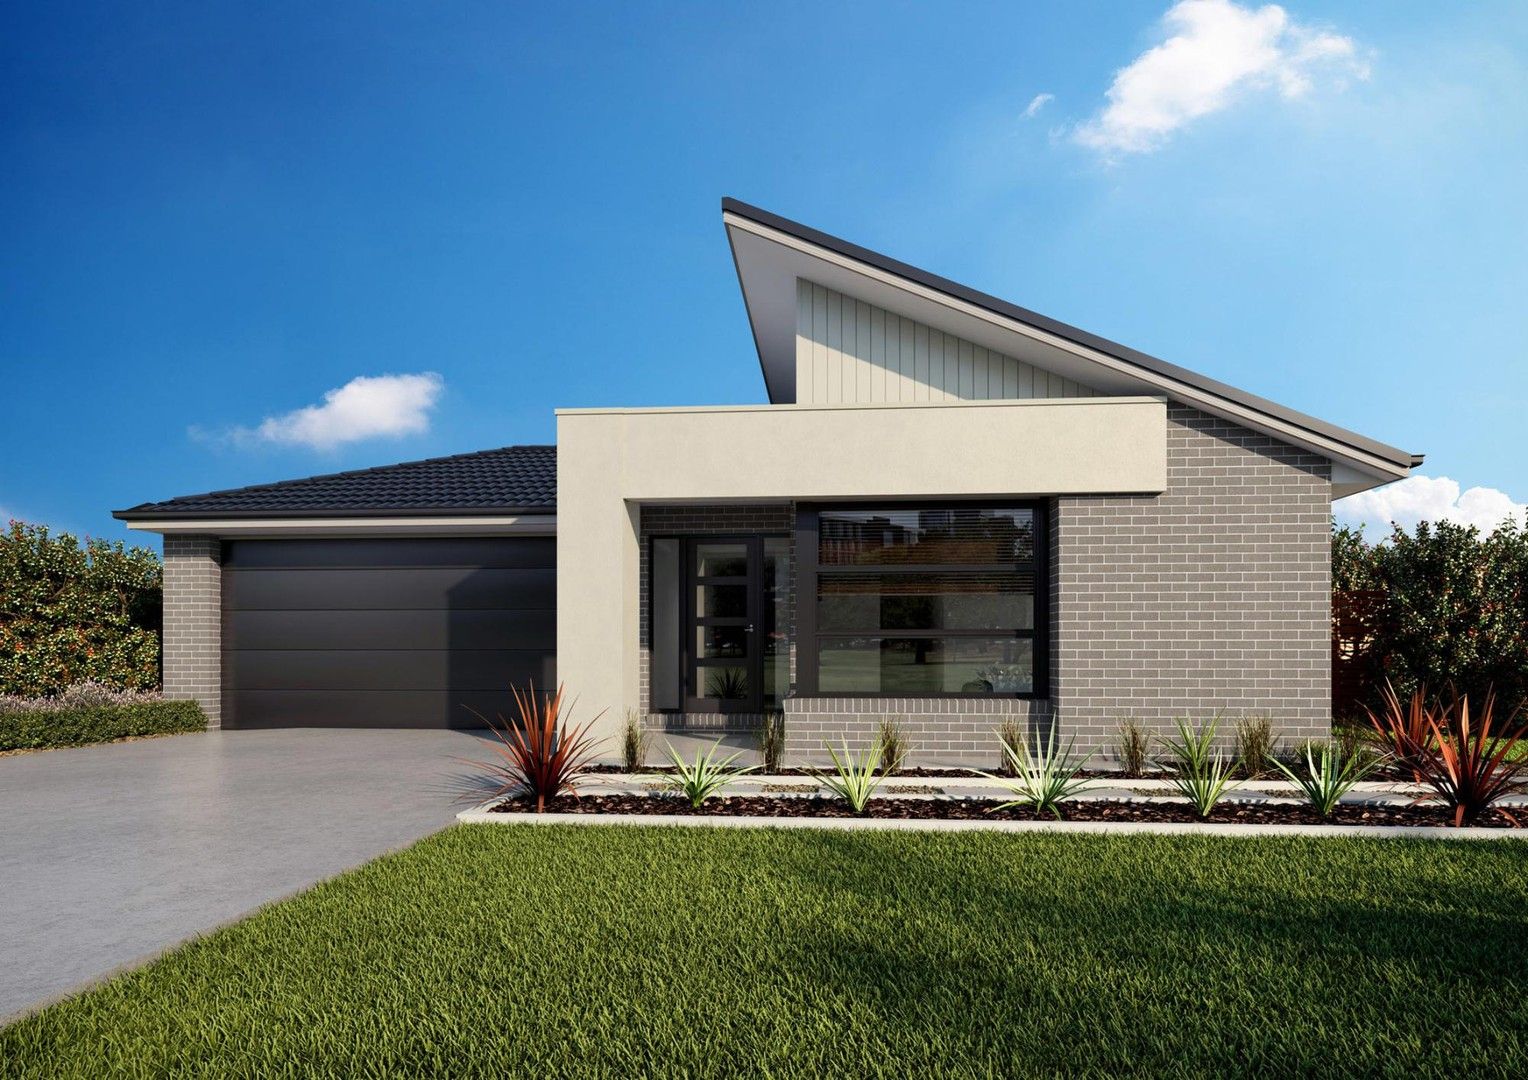 4 bedrooms New House & Land in 1597 Dutton Parade GAWLER EAST SA, 5118